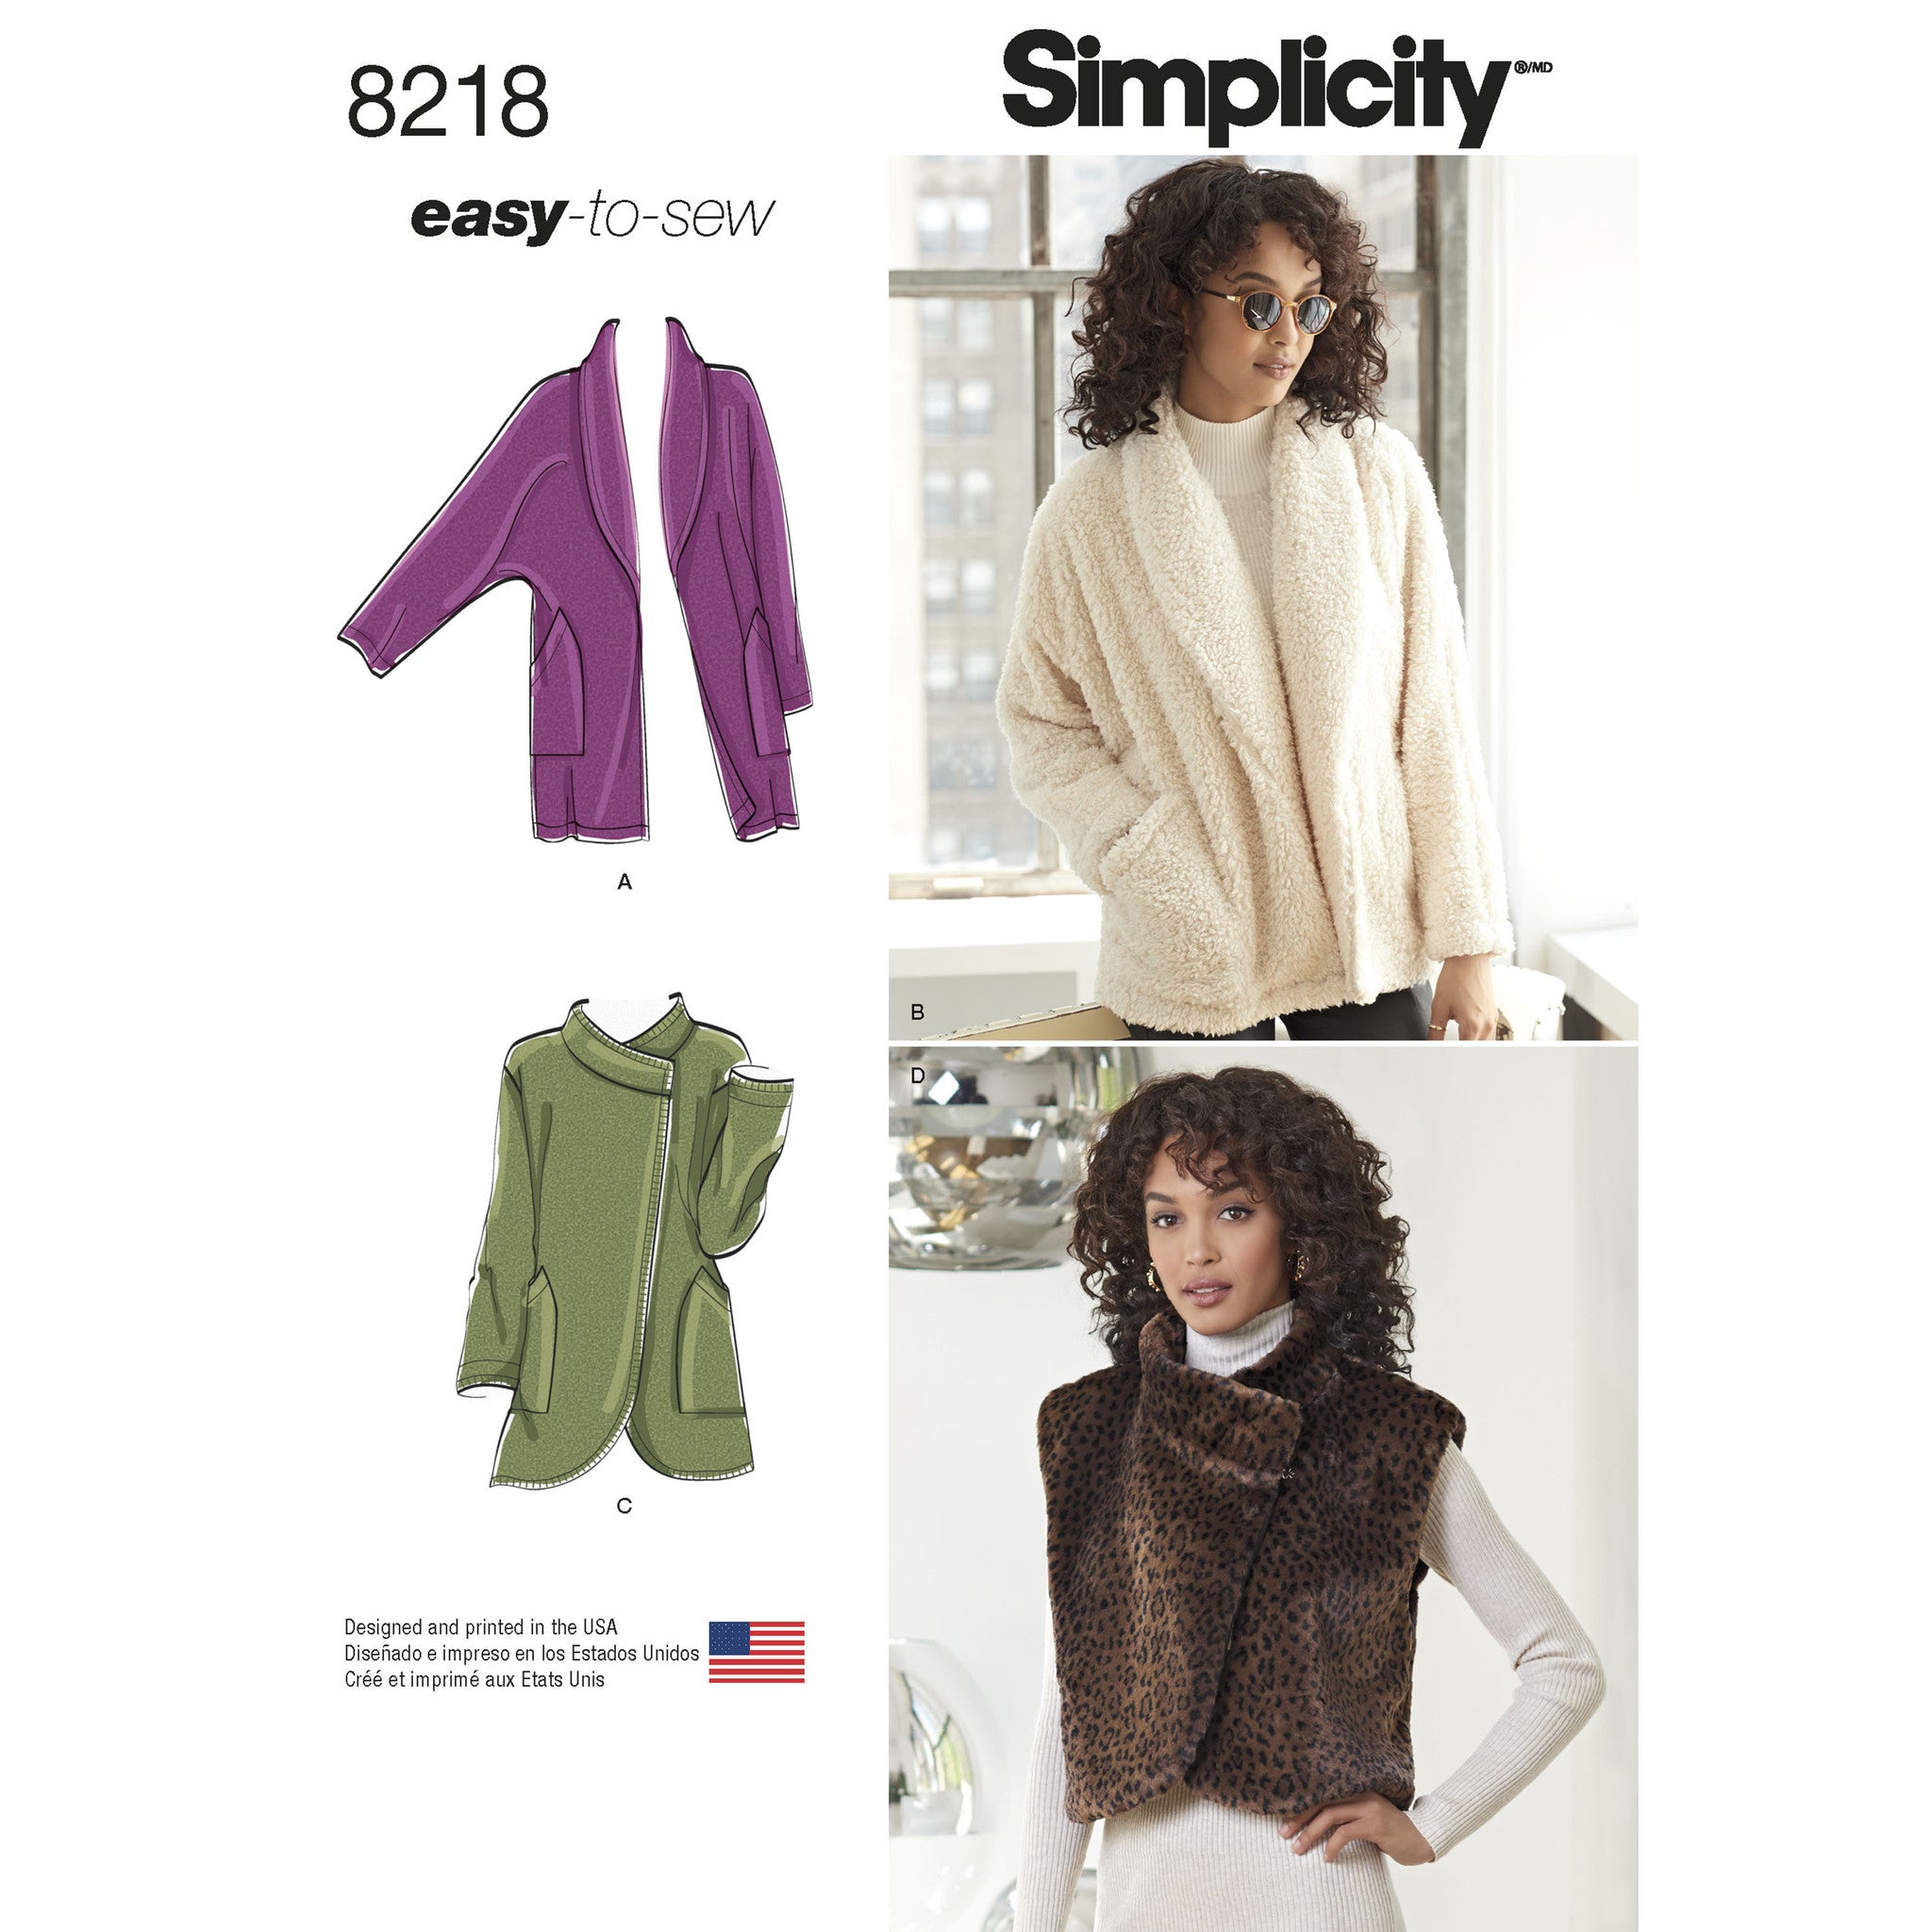 Simplicity Pattern 8218 Misses' Easy-to-Sew jackets from Jaycotts Sewing Supplies